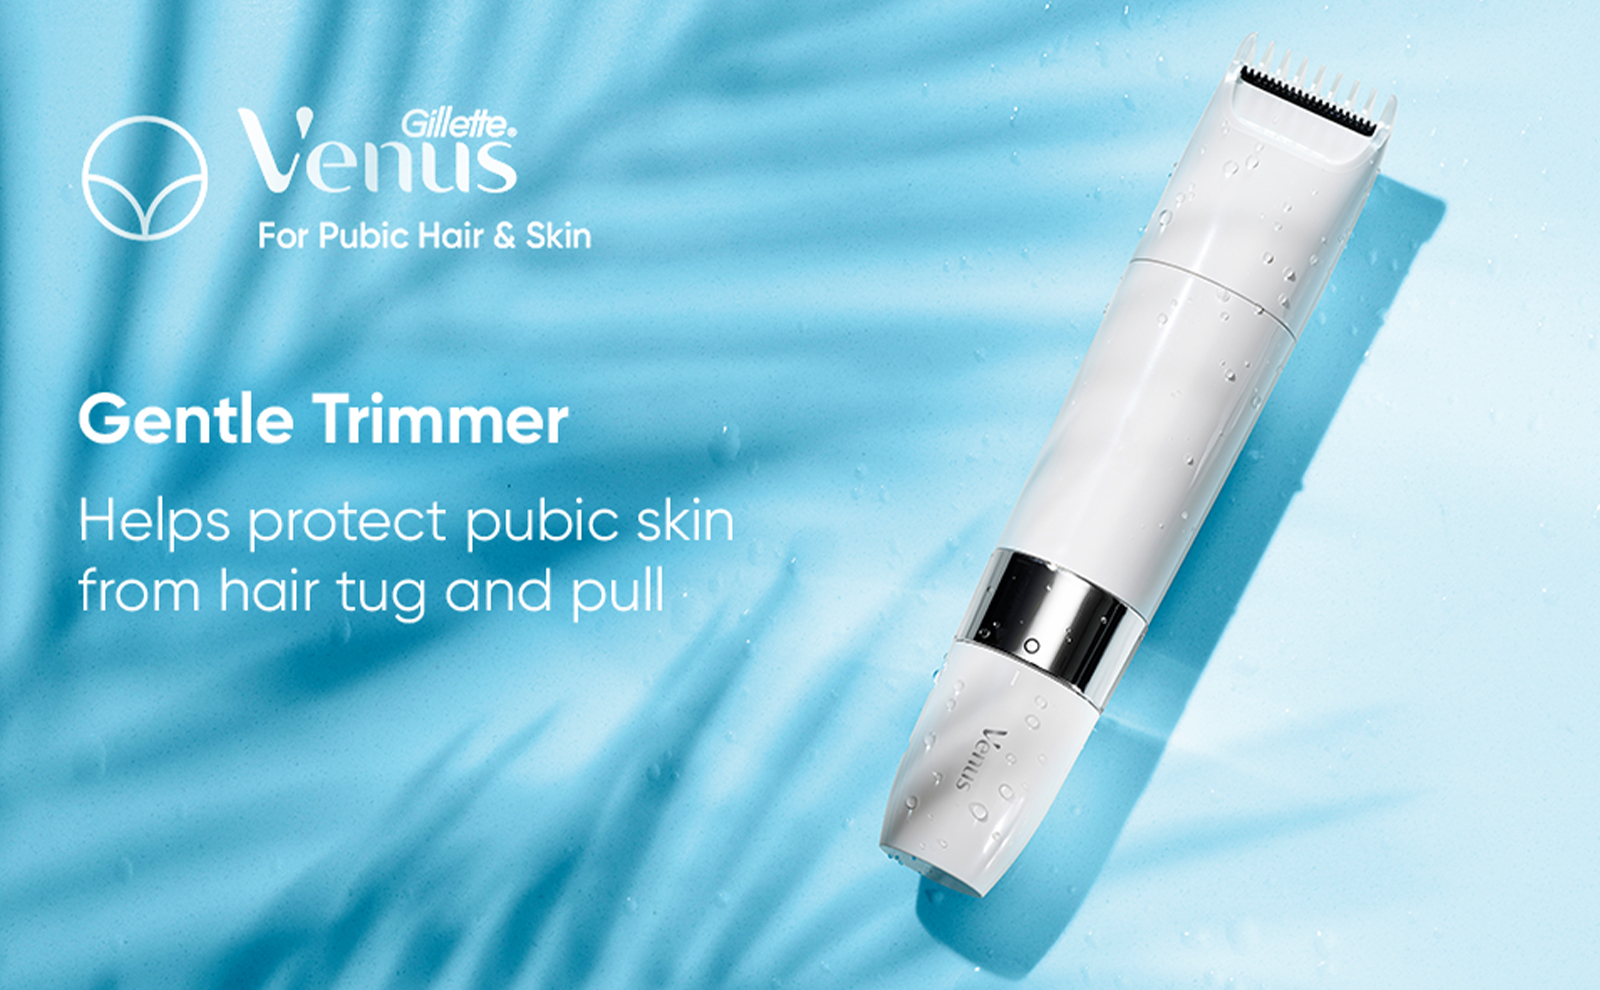 For Pubic Hair & Skin. Gentle Trimmer. Helps protect pubic skin from hair tug and pull.